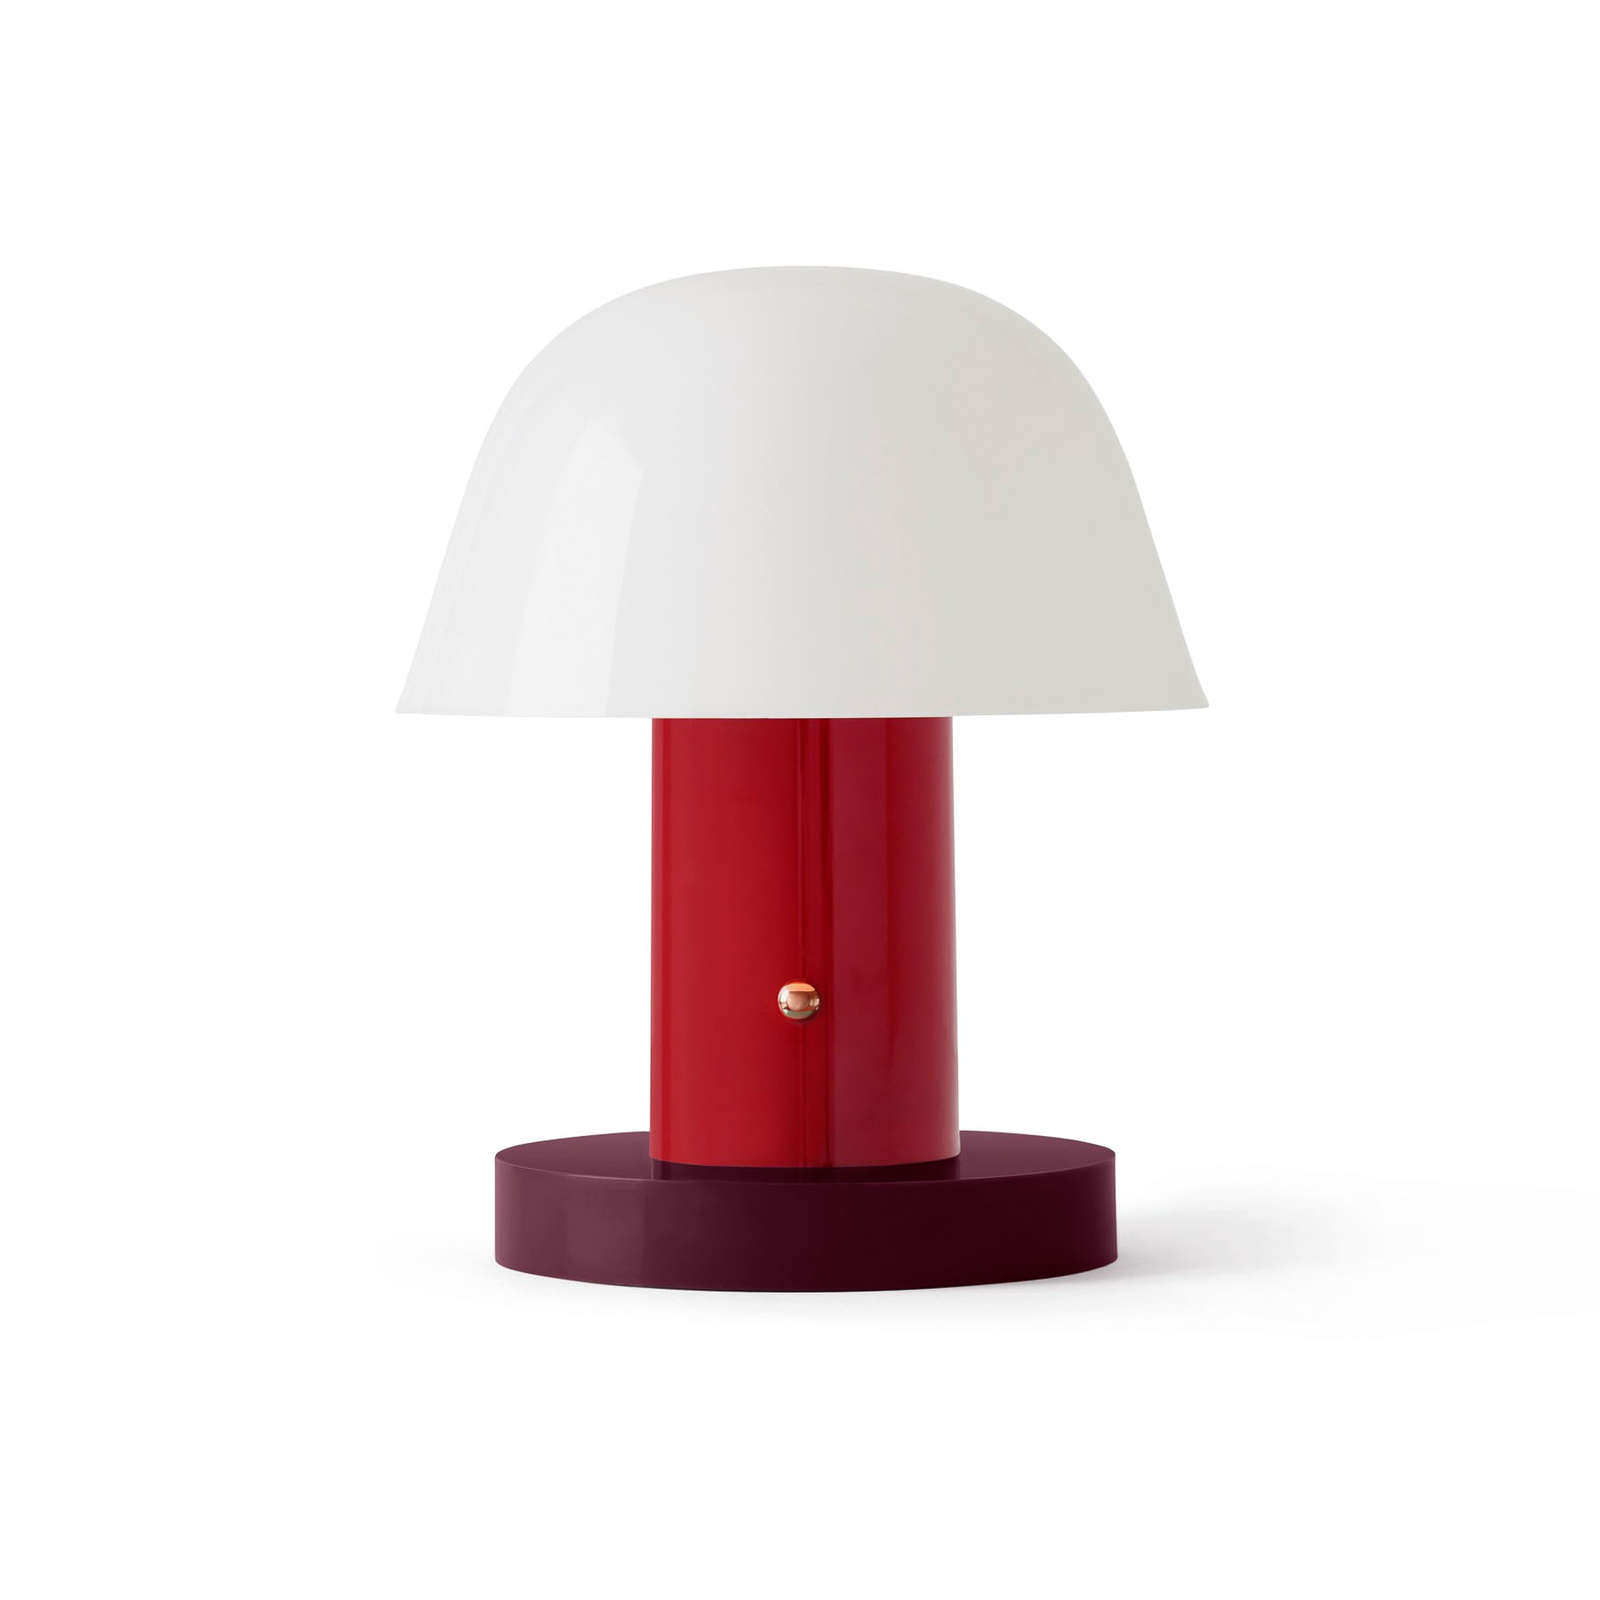 &TRADITION Setago JH27 rechargeable table lamp, maroon/grape